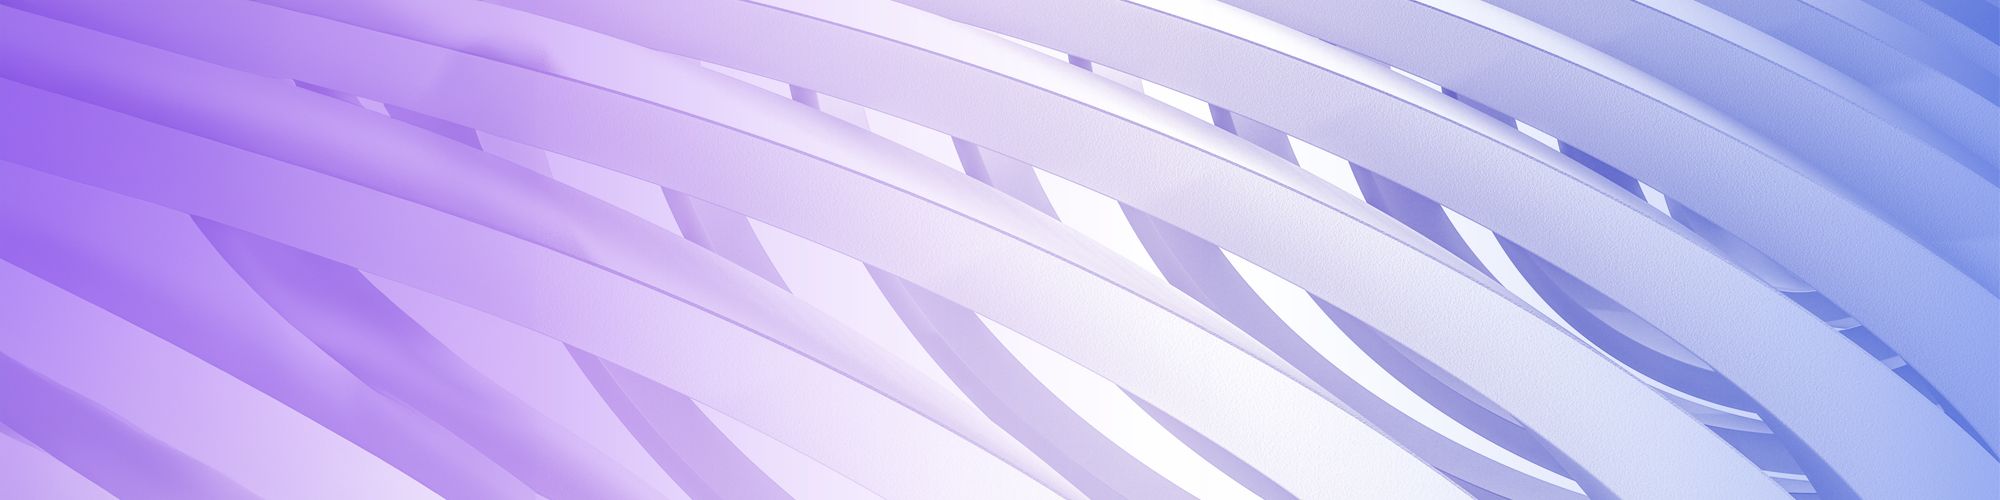 abstract-3d-banner